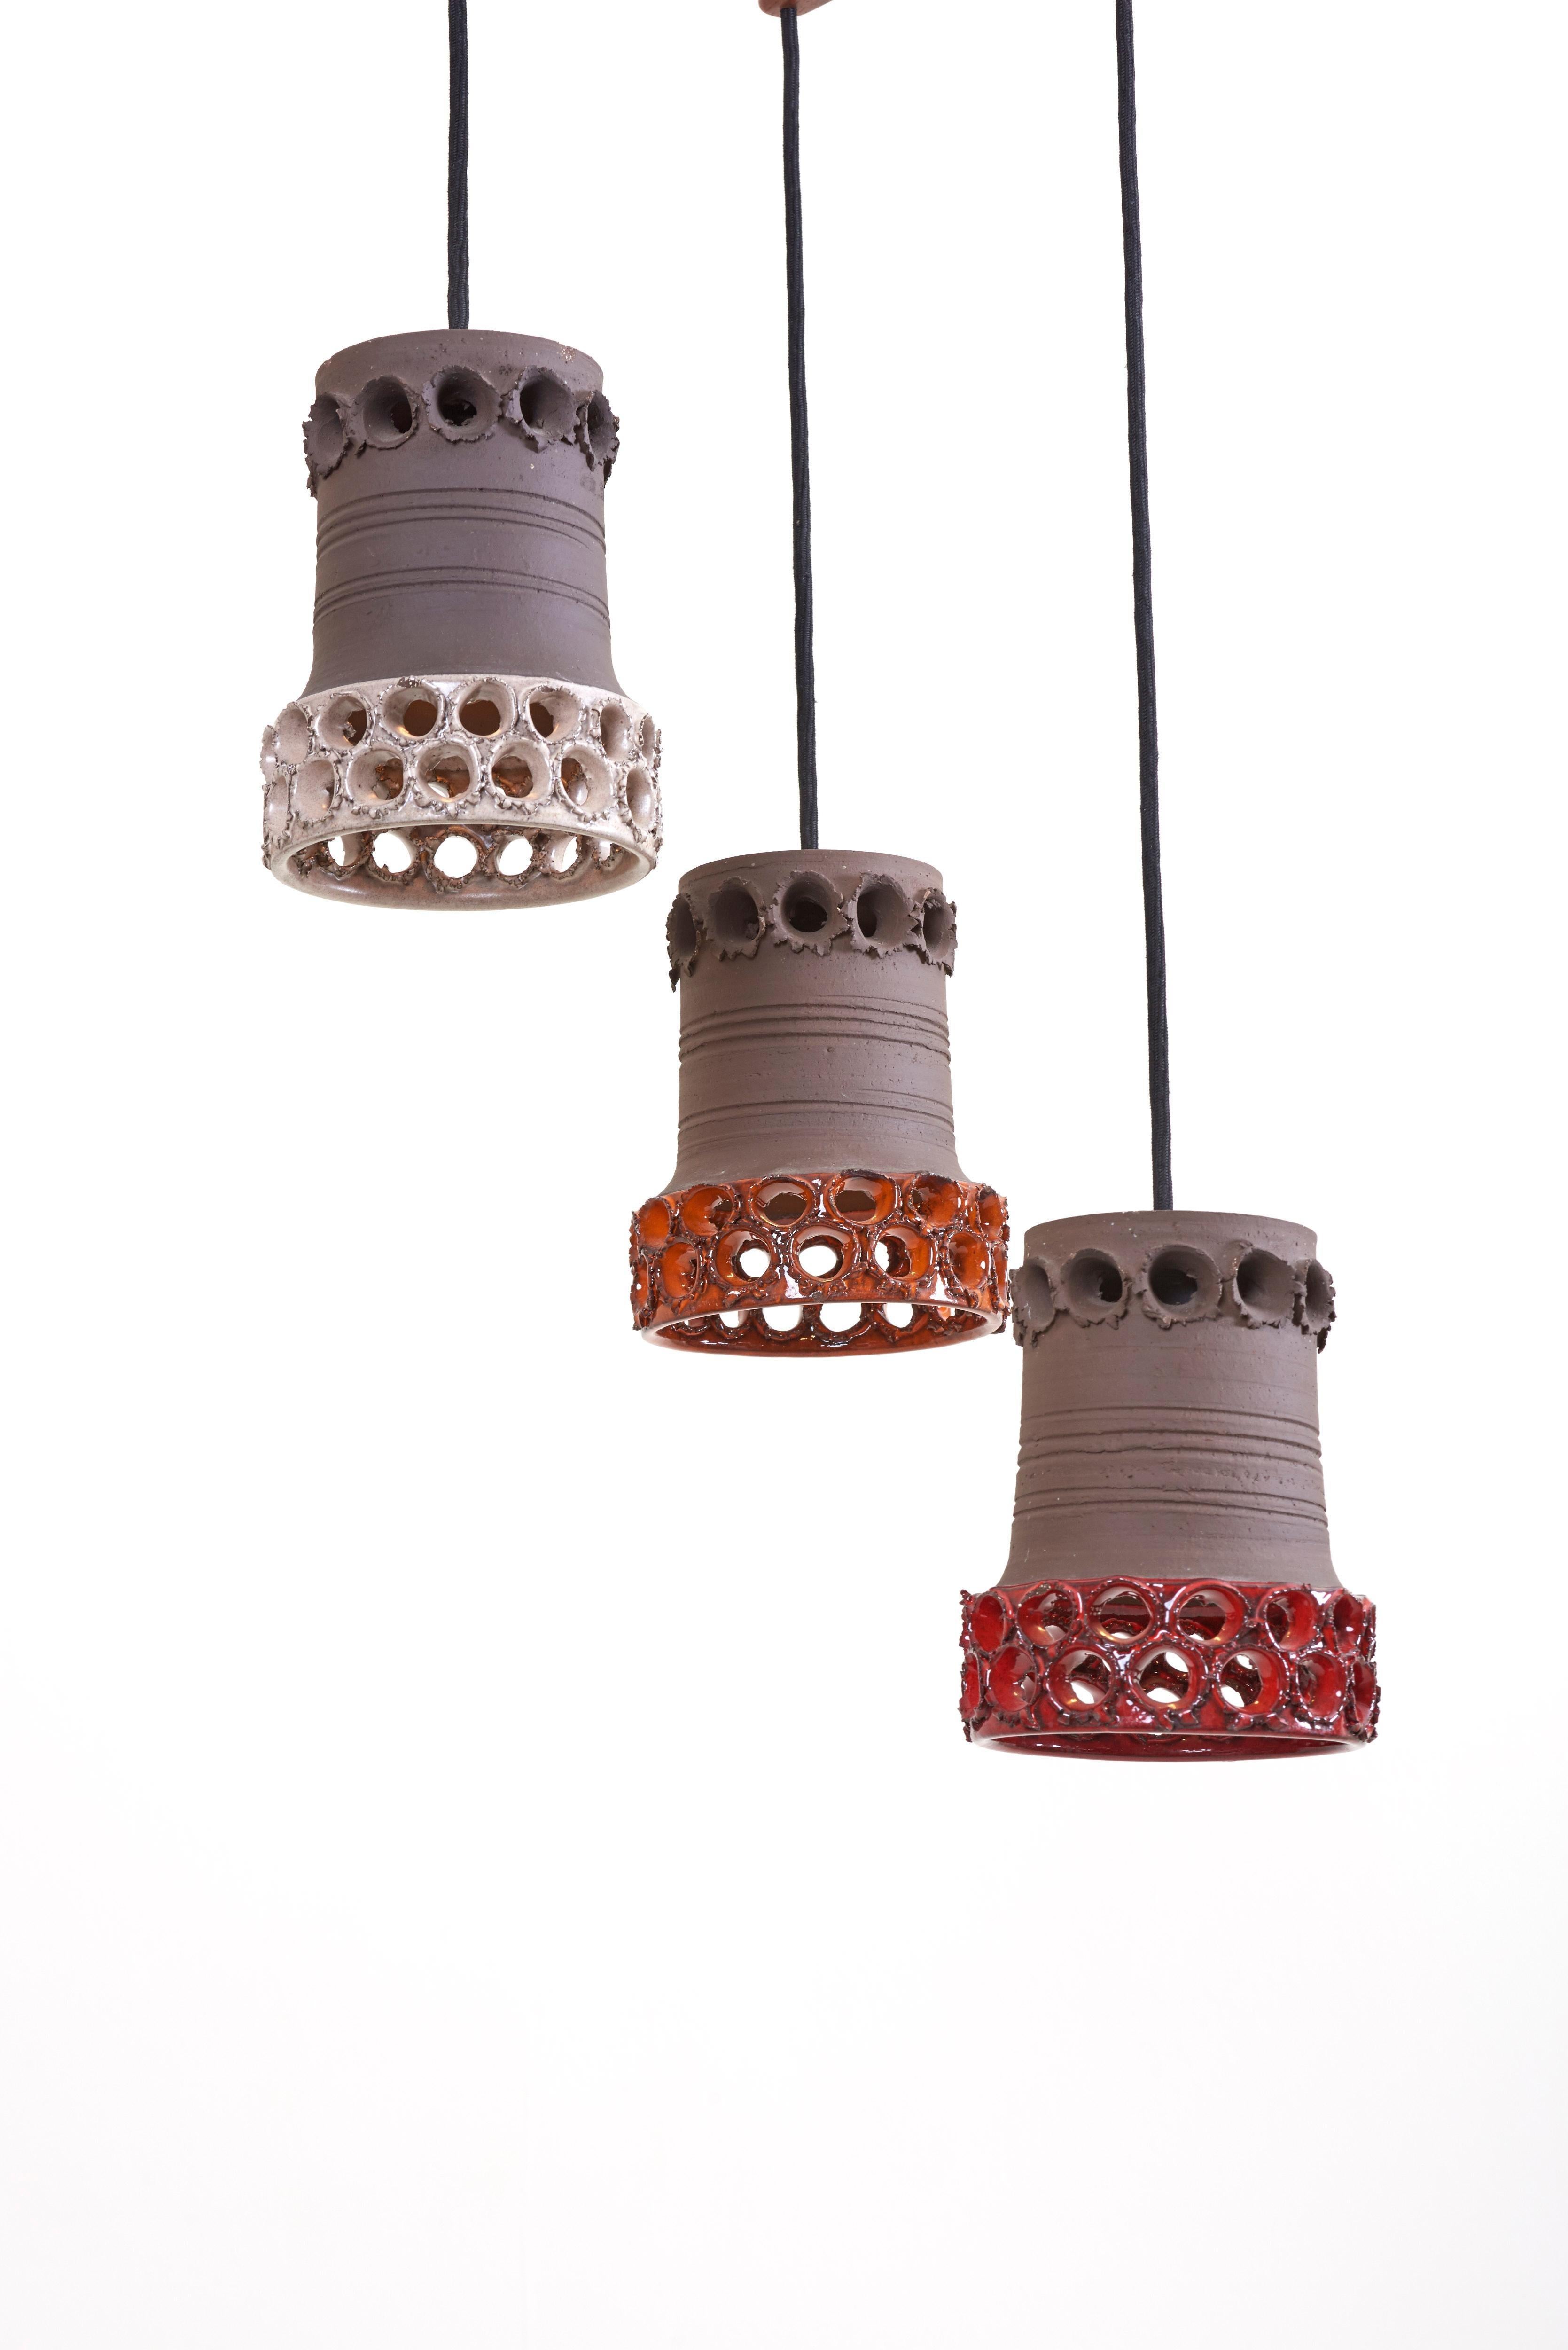 Ceramic Shade Cascade Pendant Lamp, Germany, 1970s For Sale 4